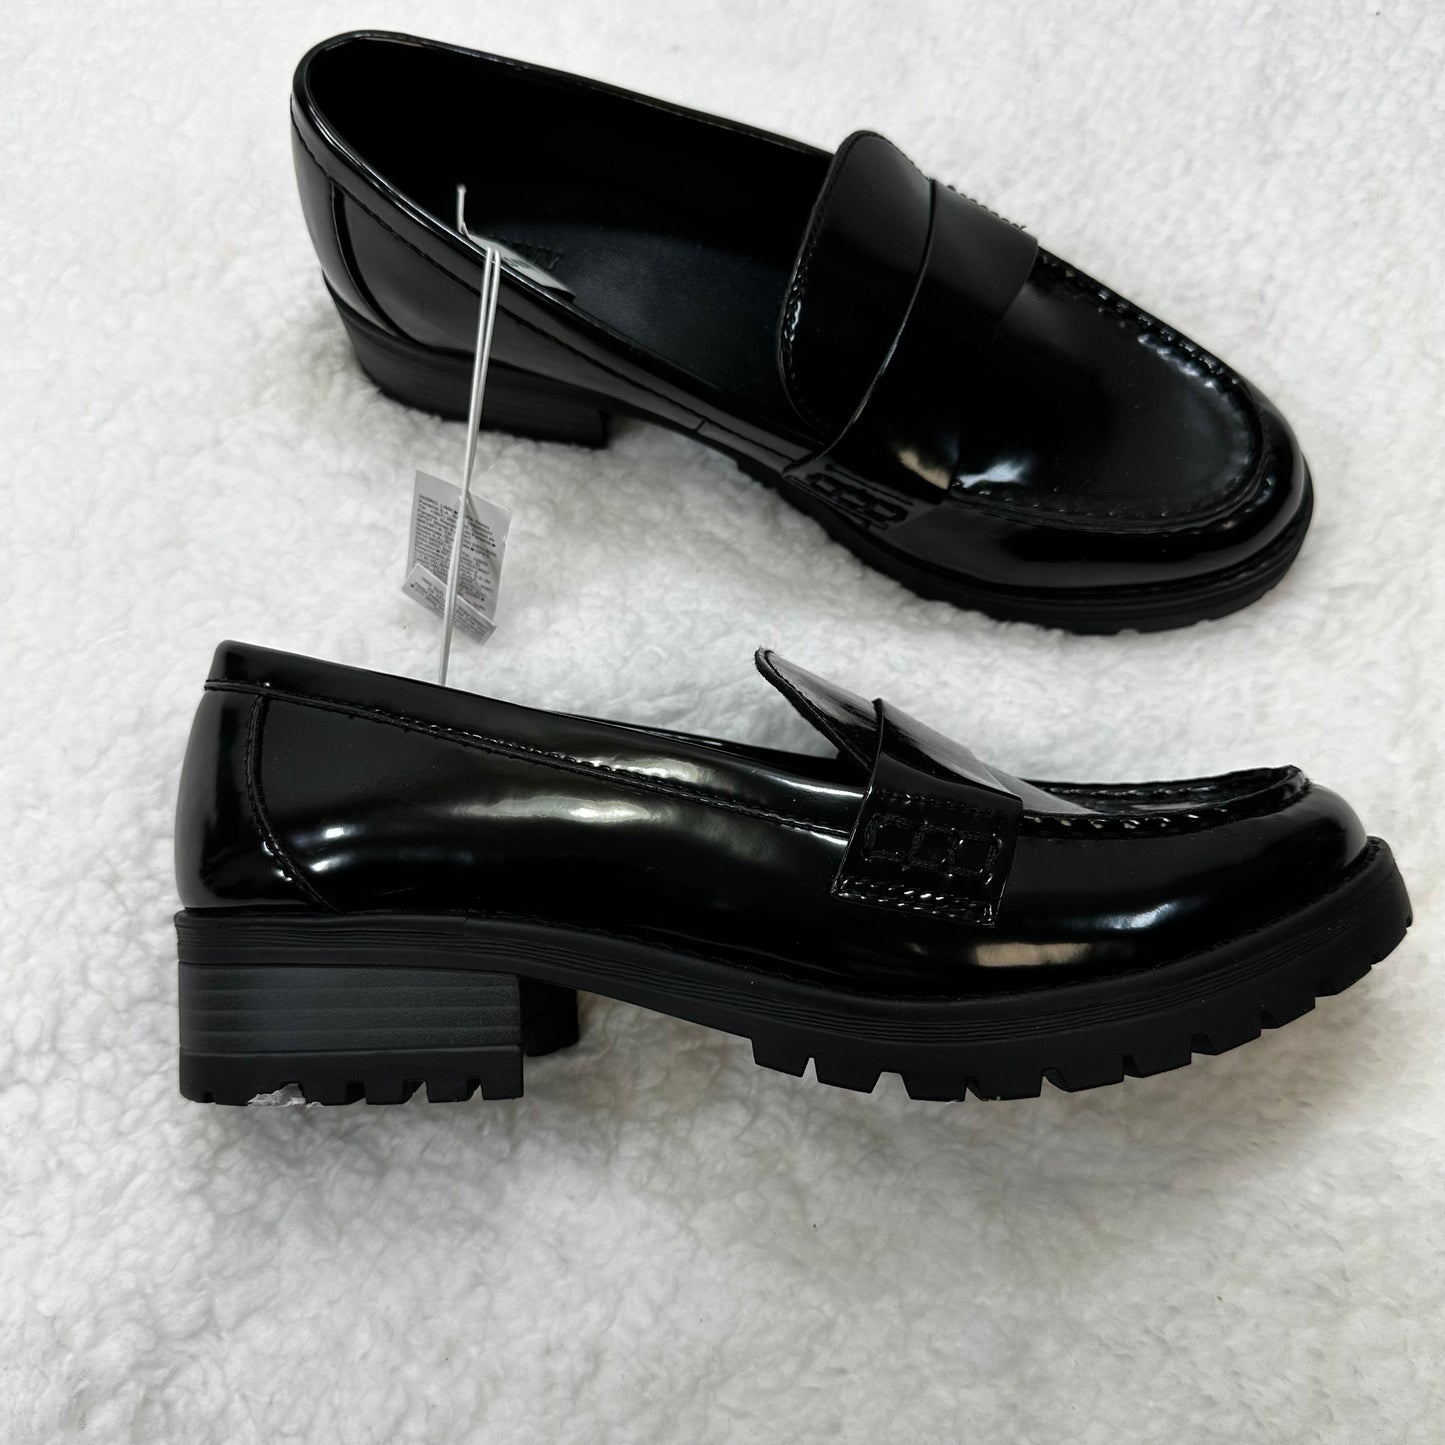 Black Shoes Flats Loafer Oxford Old Navy O, Size 10